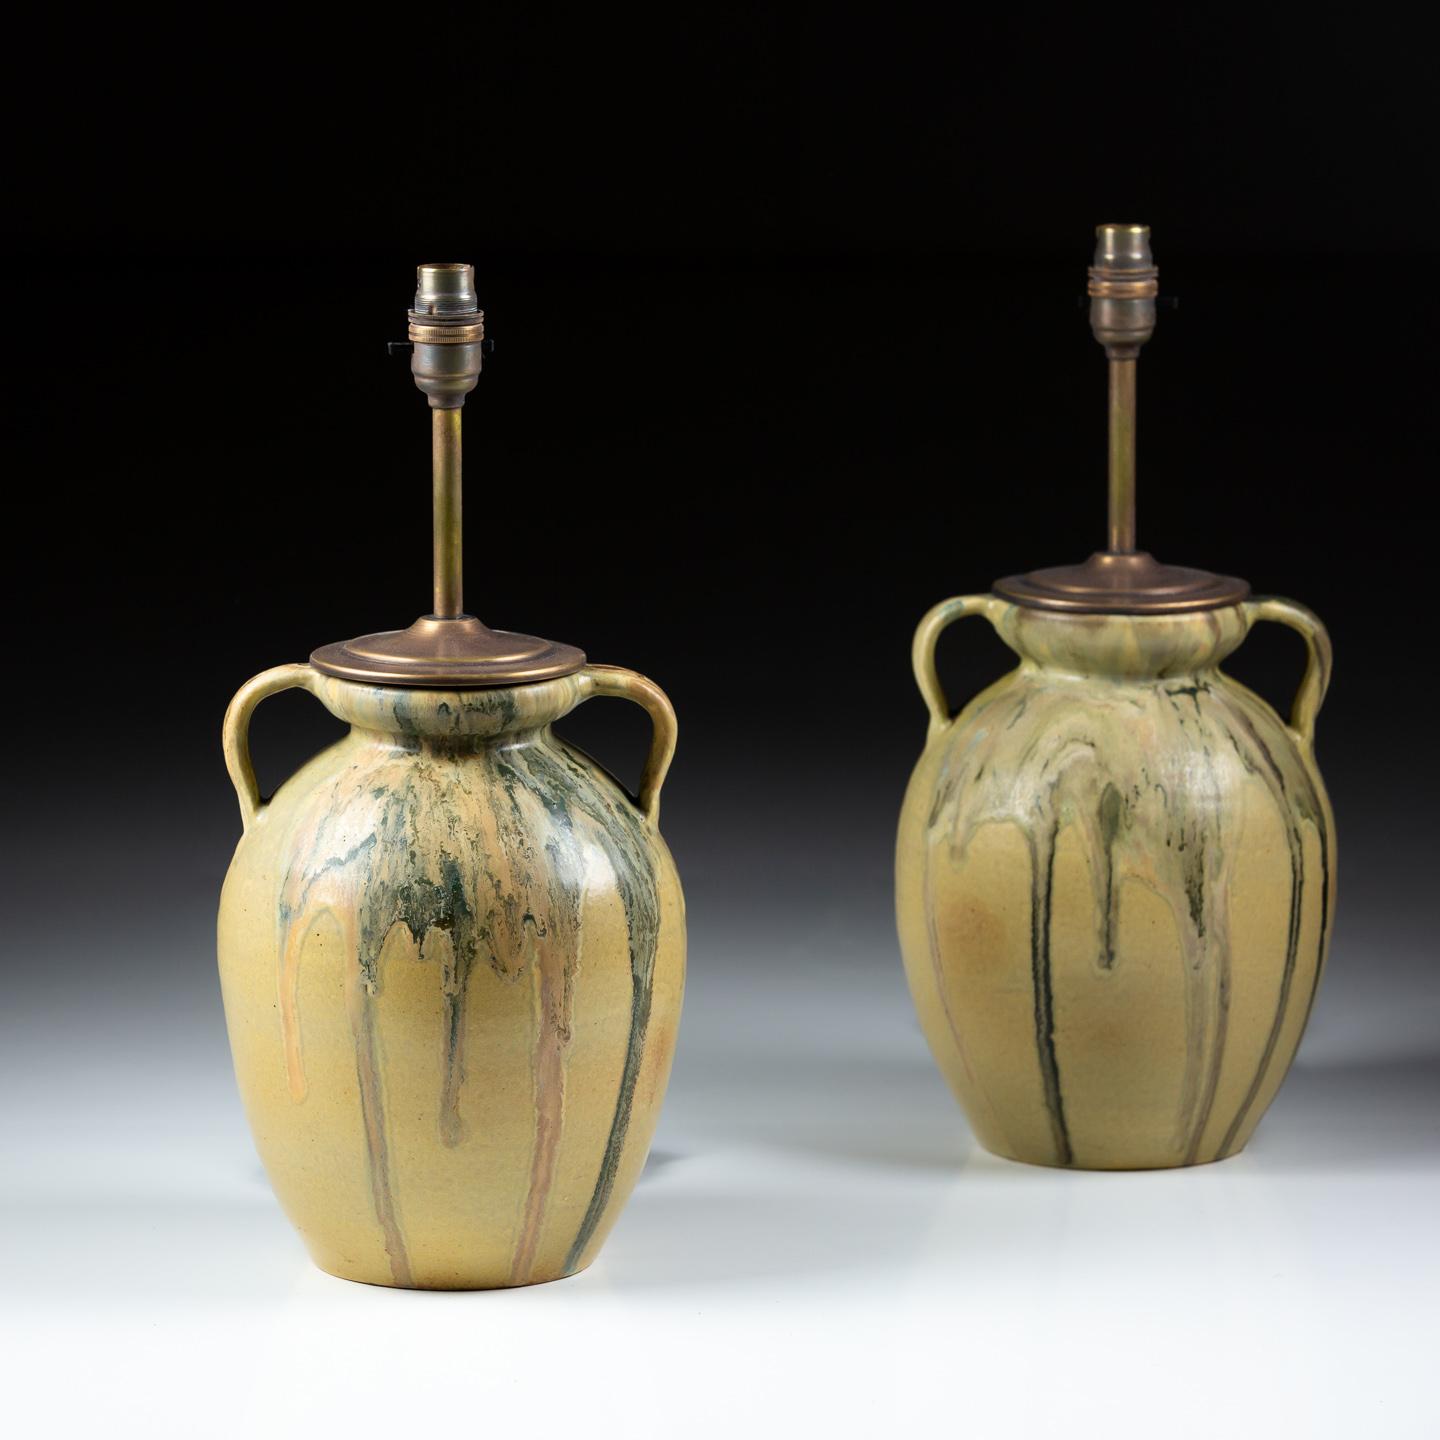 Pair of impressive studio pottery vases by Leon Pointu (1879 - 1942) both signed. Stoneware, with handles and impressive controlled dripping glaze. As Lamps 

Rewired (antique style cord) and PAT tested for UK 